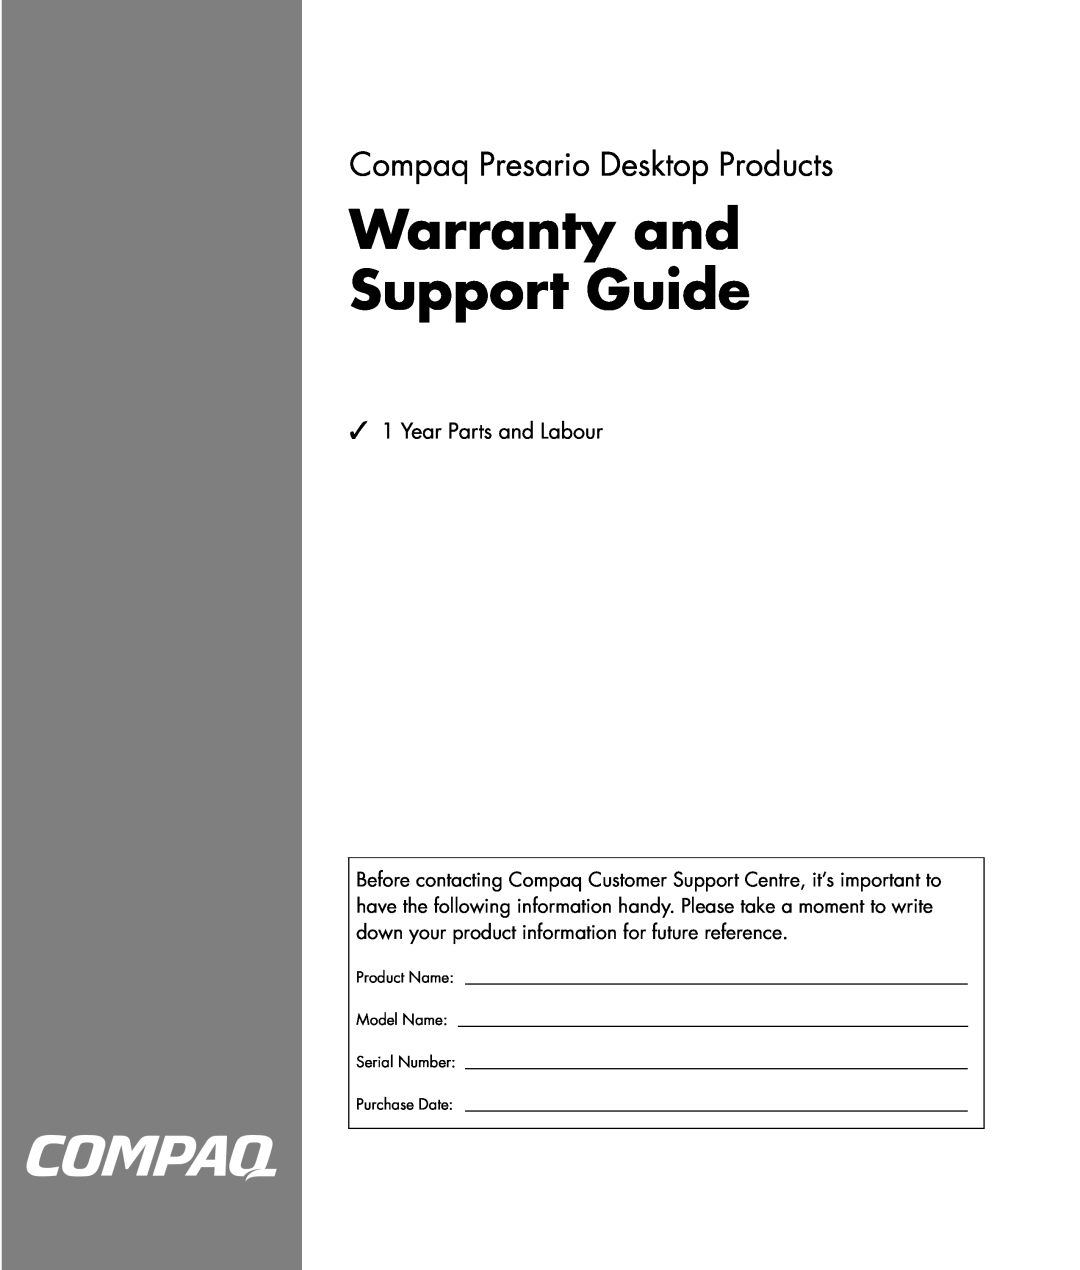 HP S6300UK manual Warranty and Support Guide, Compaq Presario Desktop Products, Year Parts and Labour, Product Name 